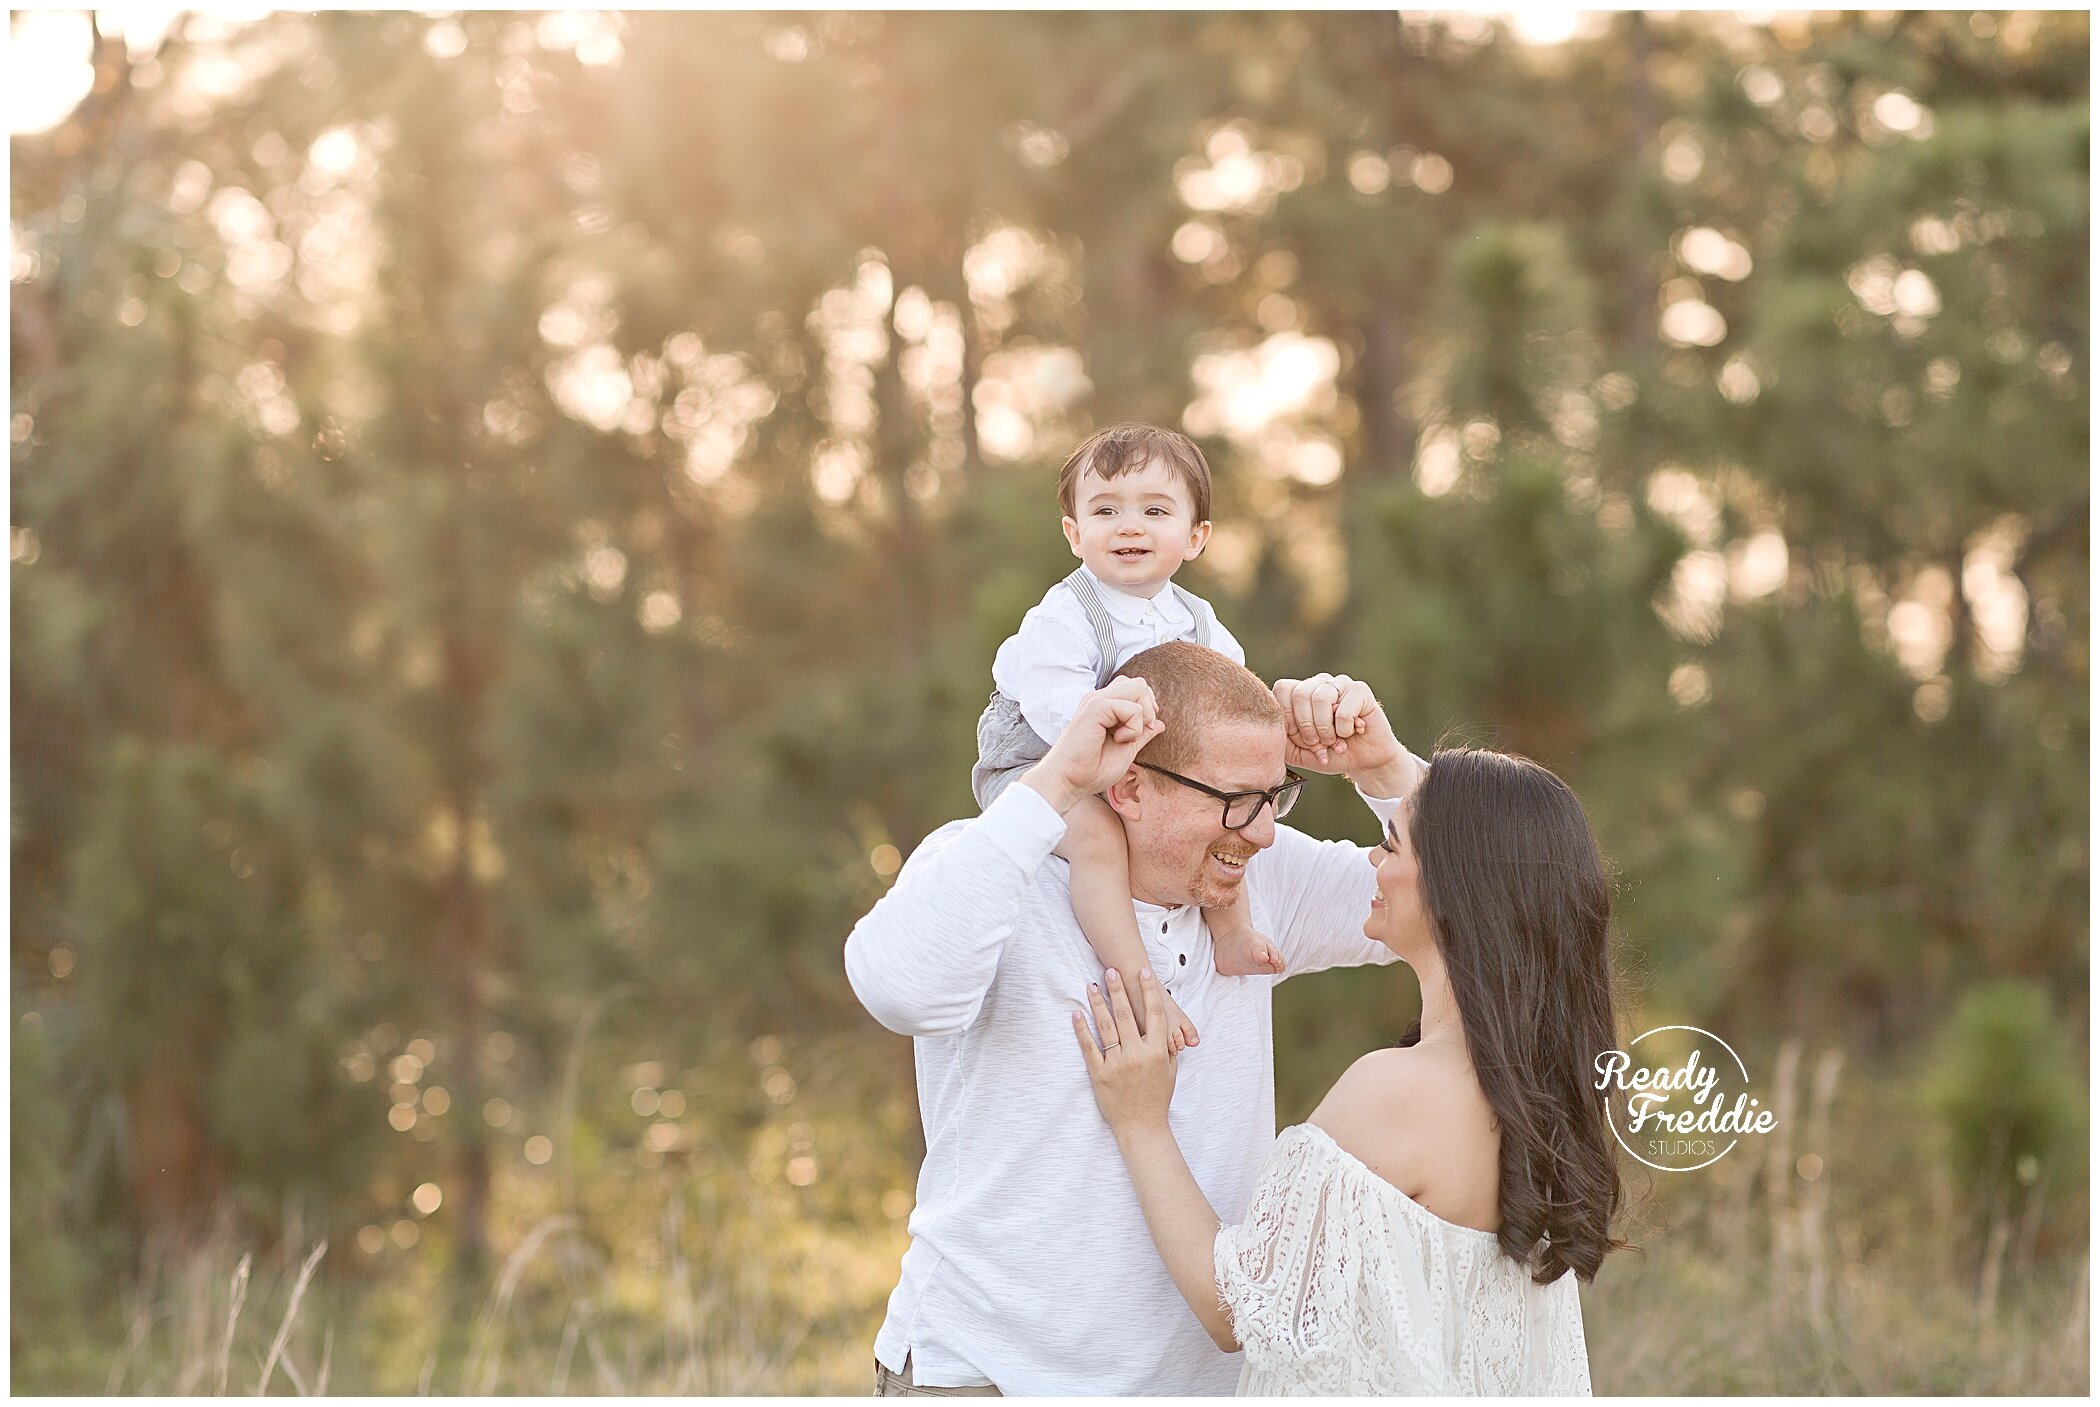 Best Family Photographers in Miami, FL - Family session at sunset in Miami, FL with Ready Freddie Studios